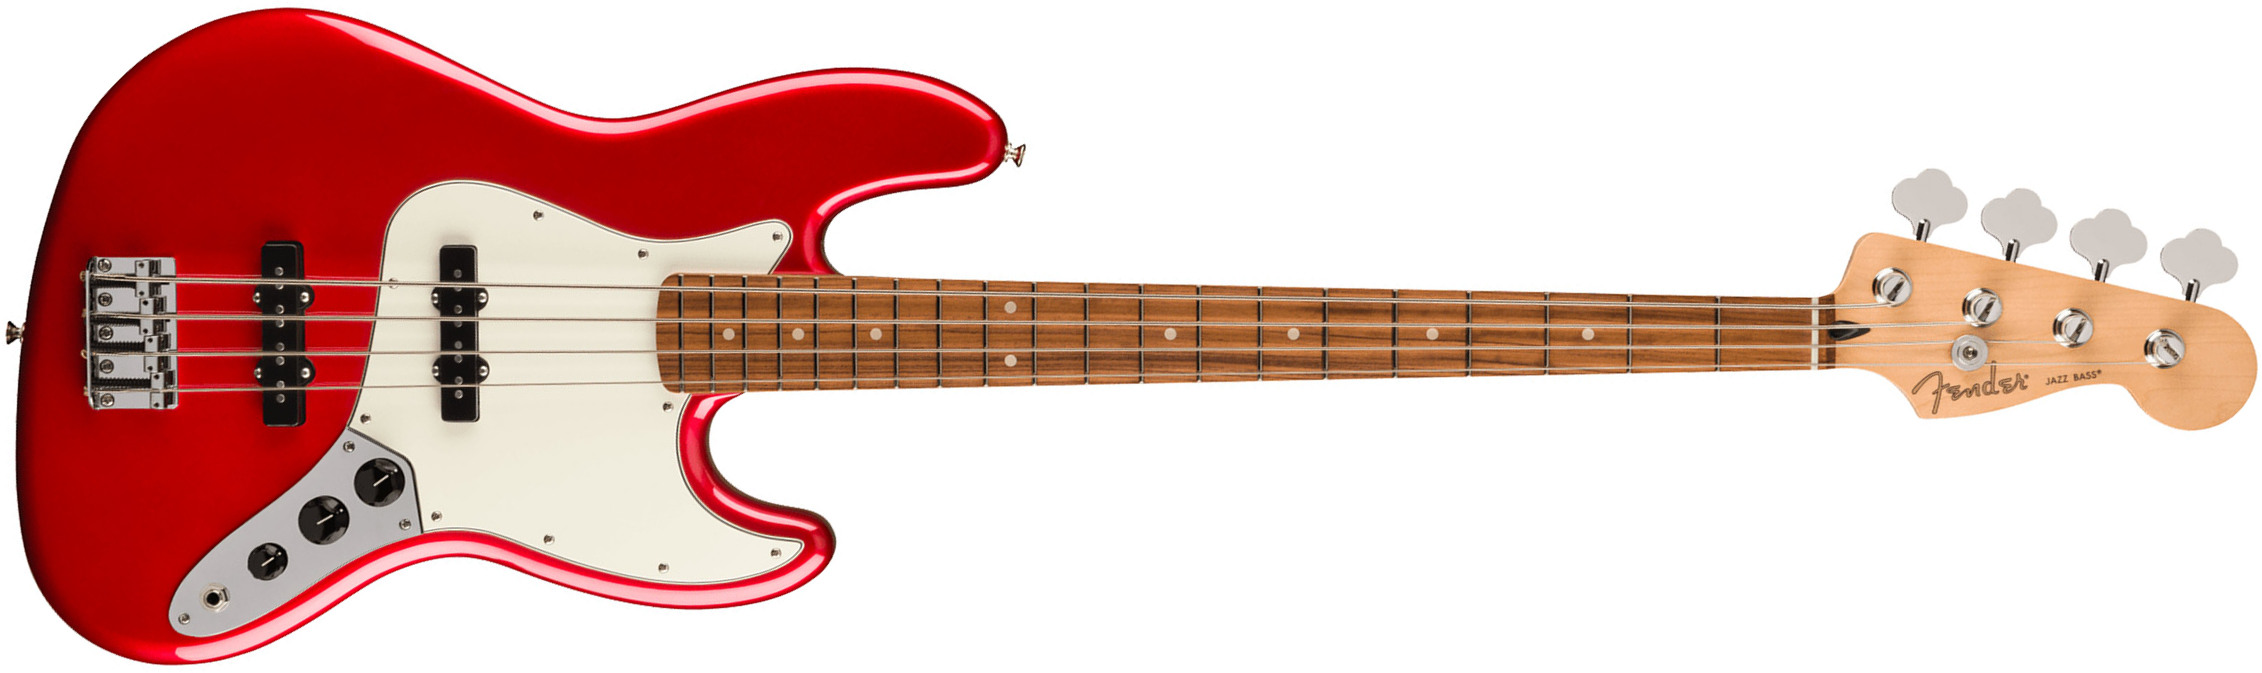 Fender Jazz Bass Player Mex 2023 Pf - Candy Apple Red - Solid body electric bass - Main picture